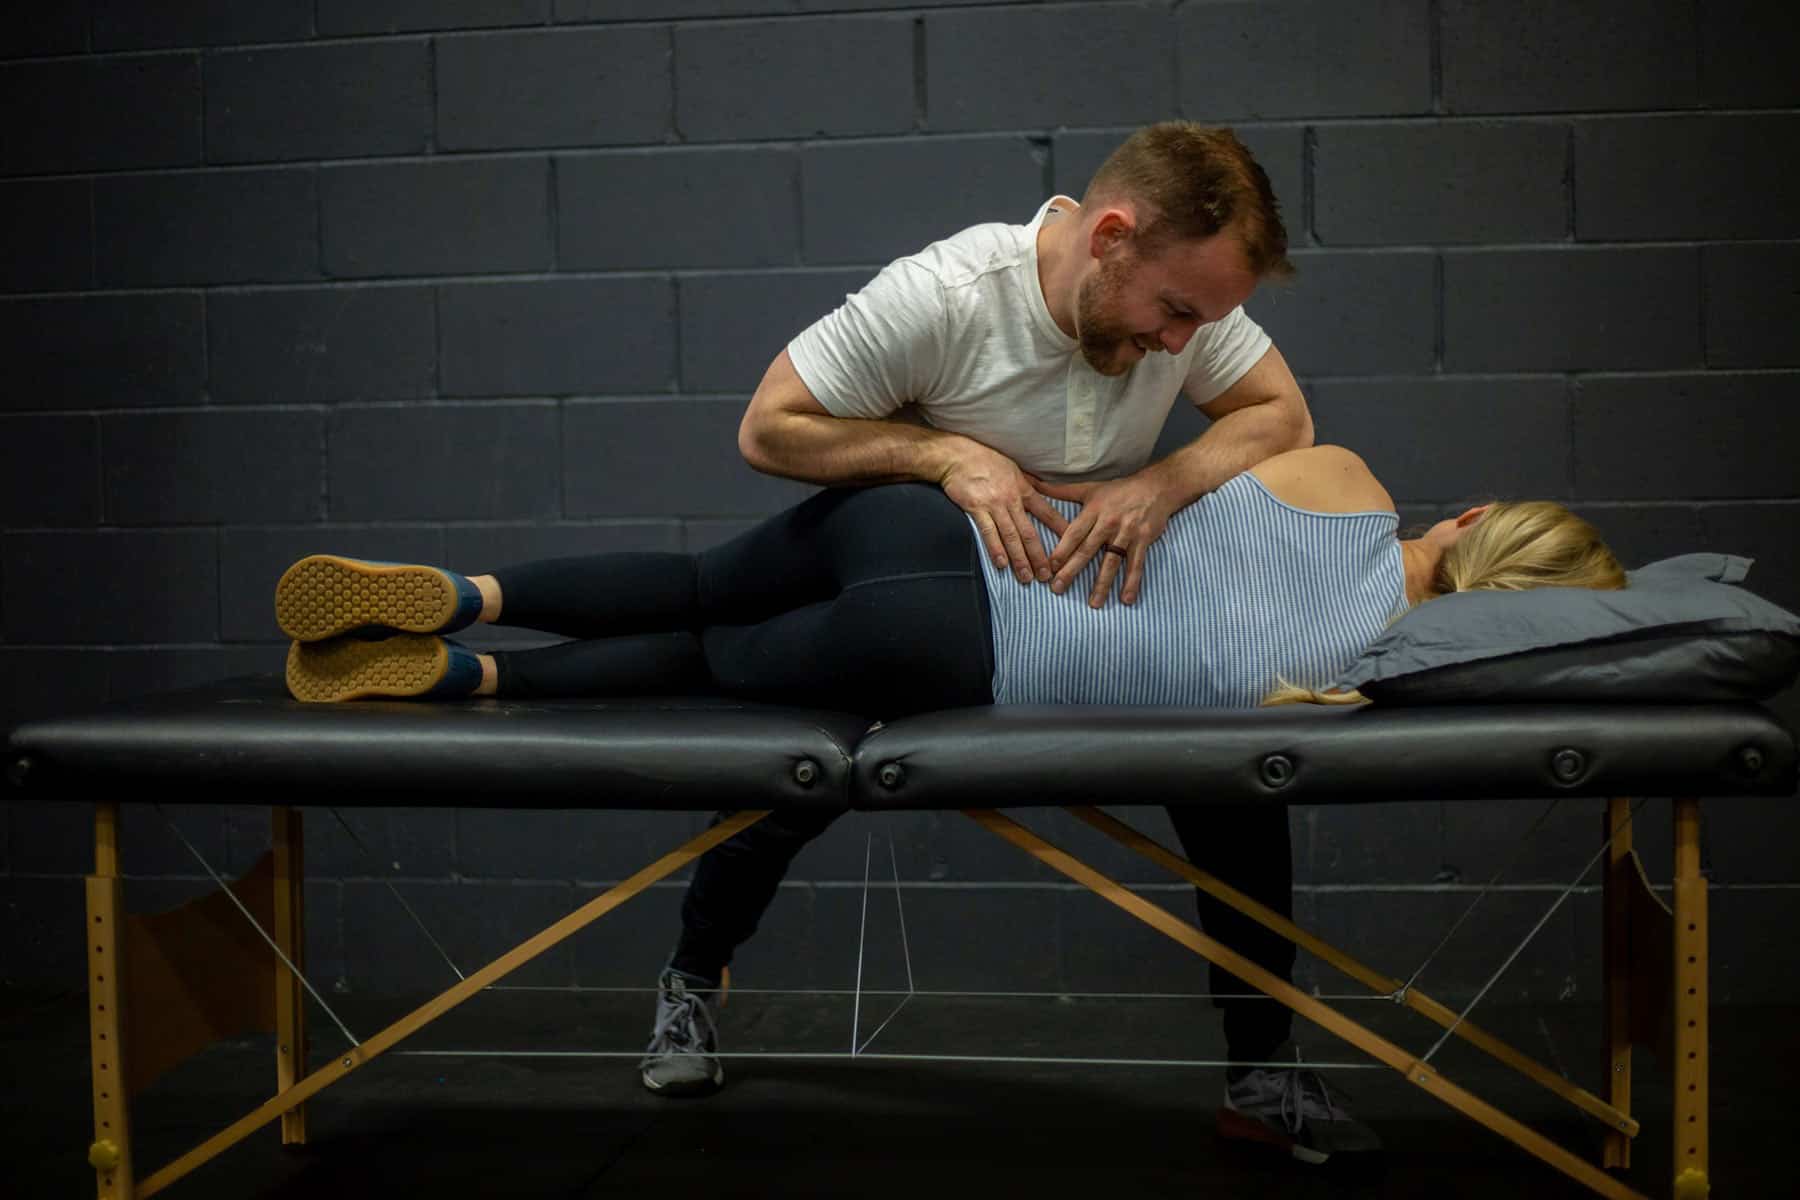 Spinal Manipulation & Mobilization | Onward Physical Therapy